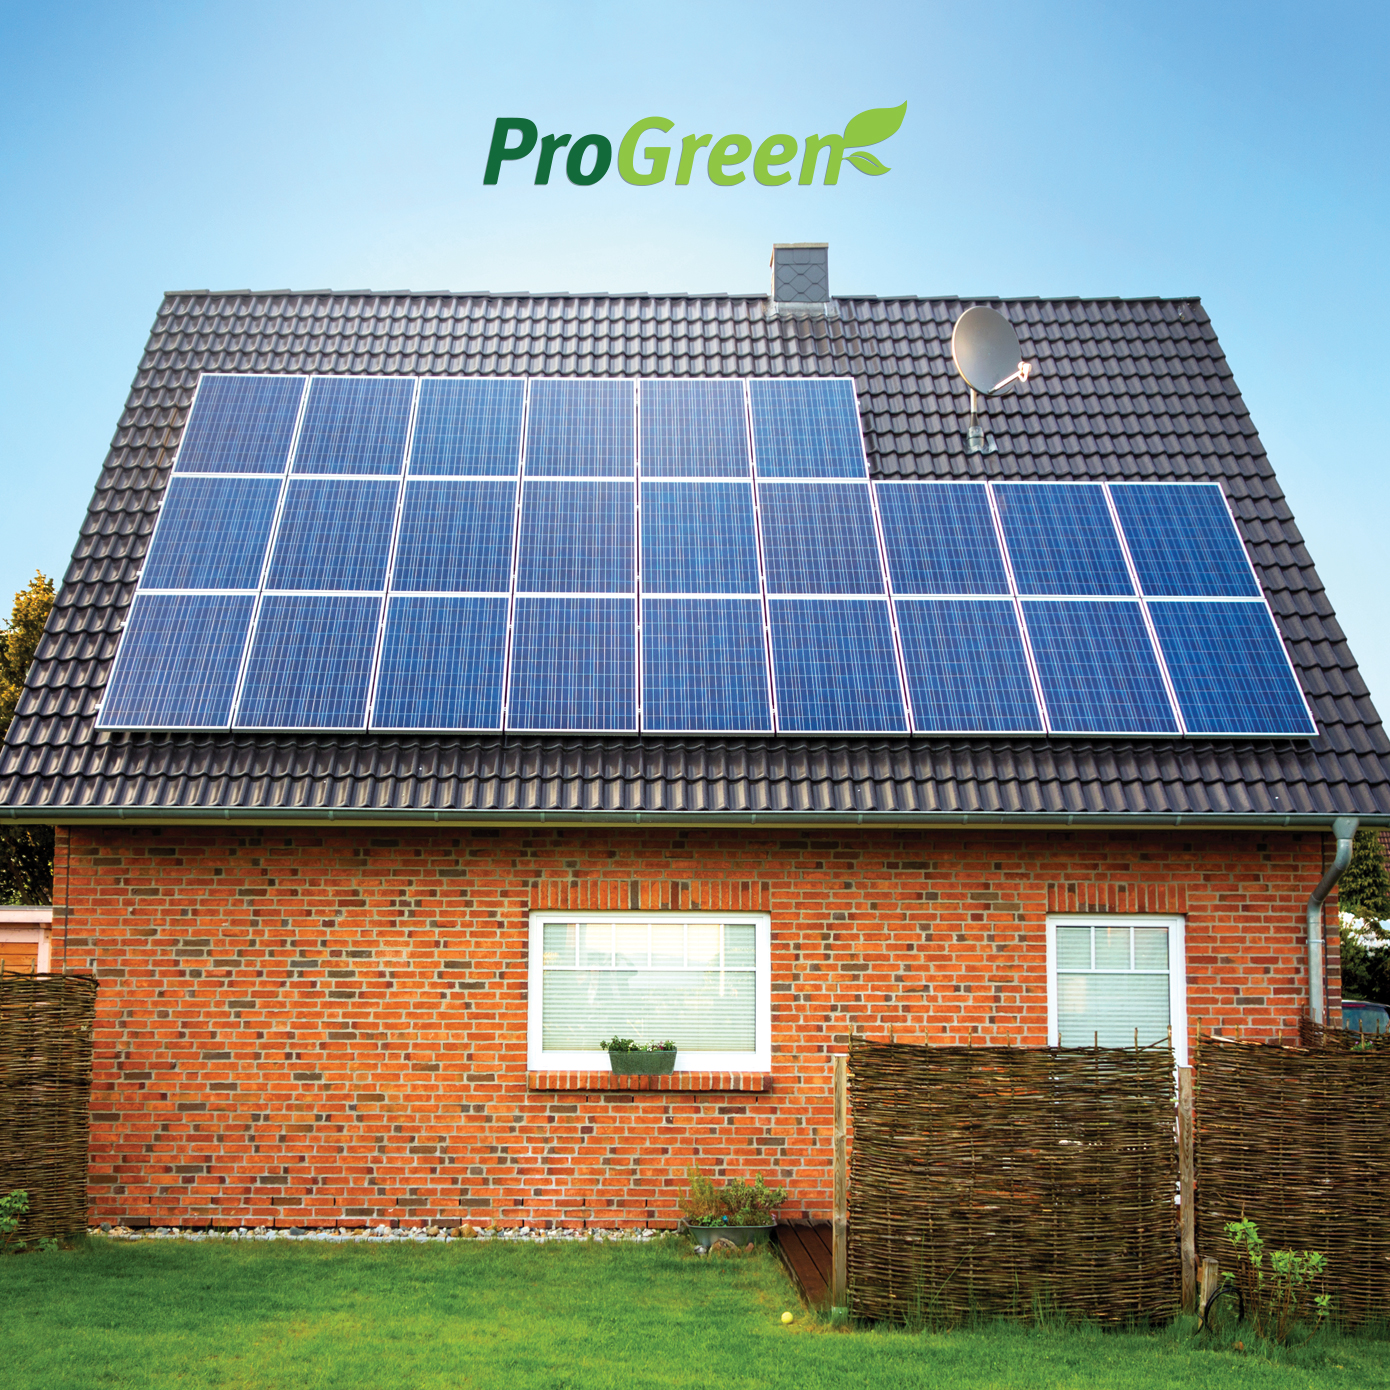 ProGreen - not only save, but also support environmental projects